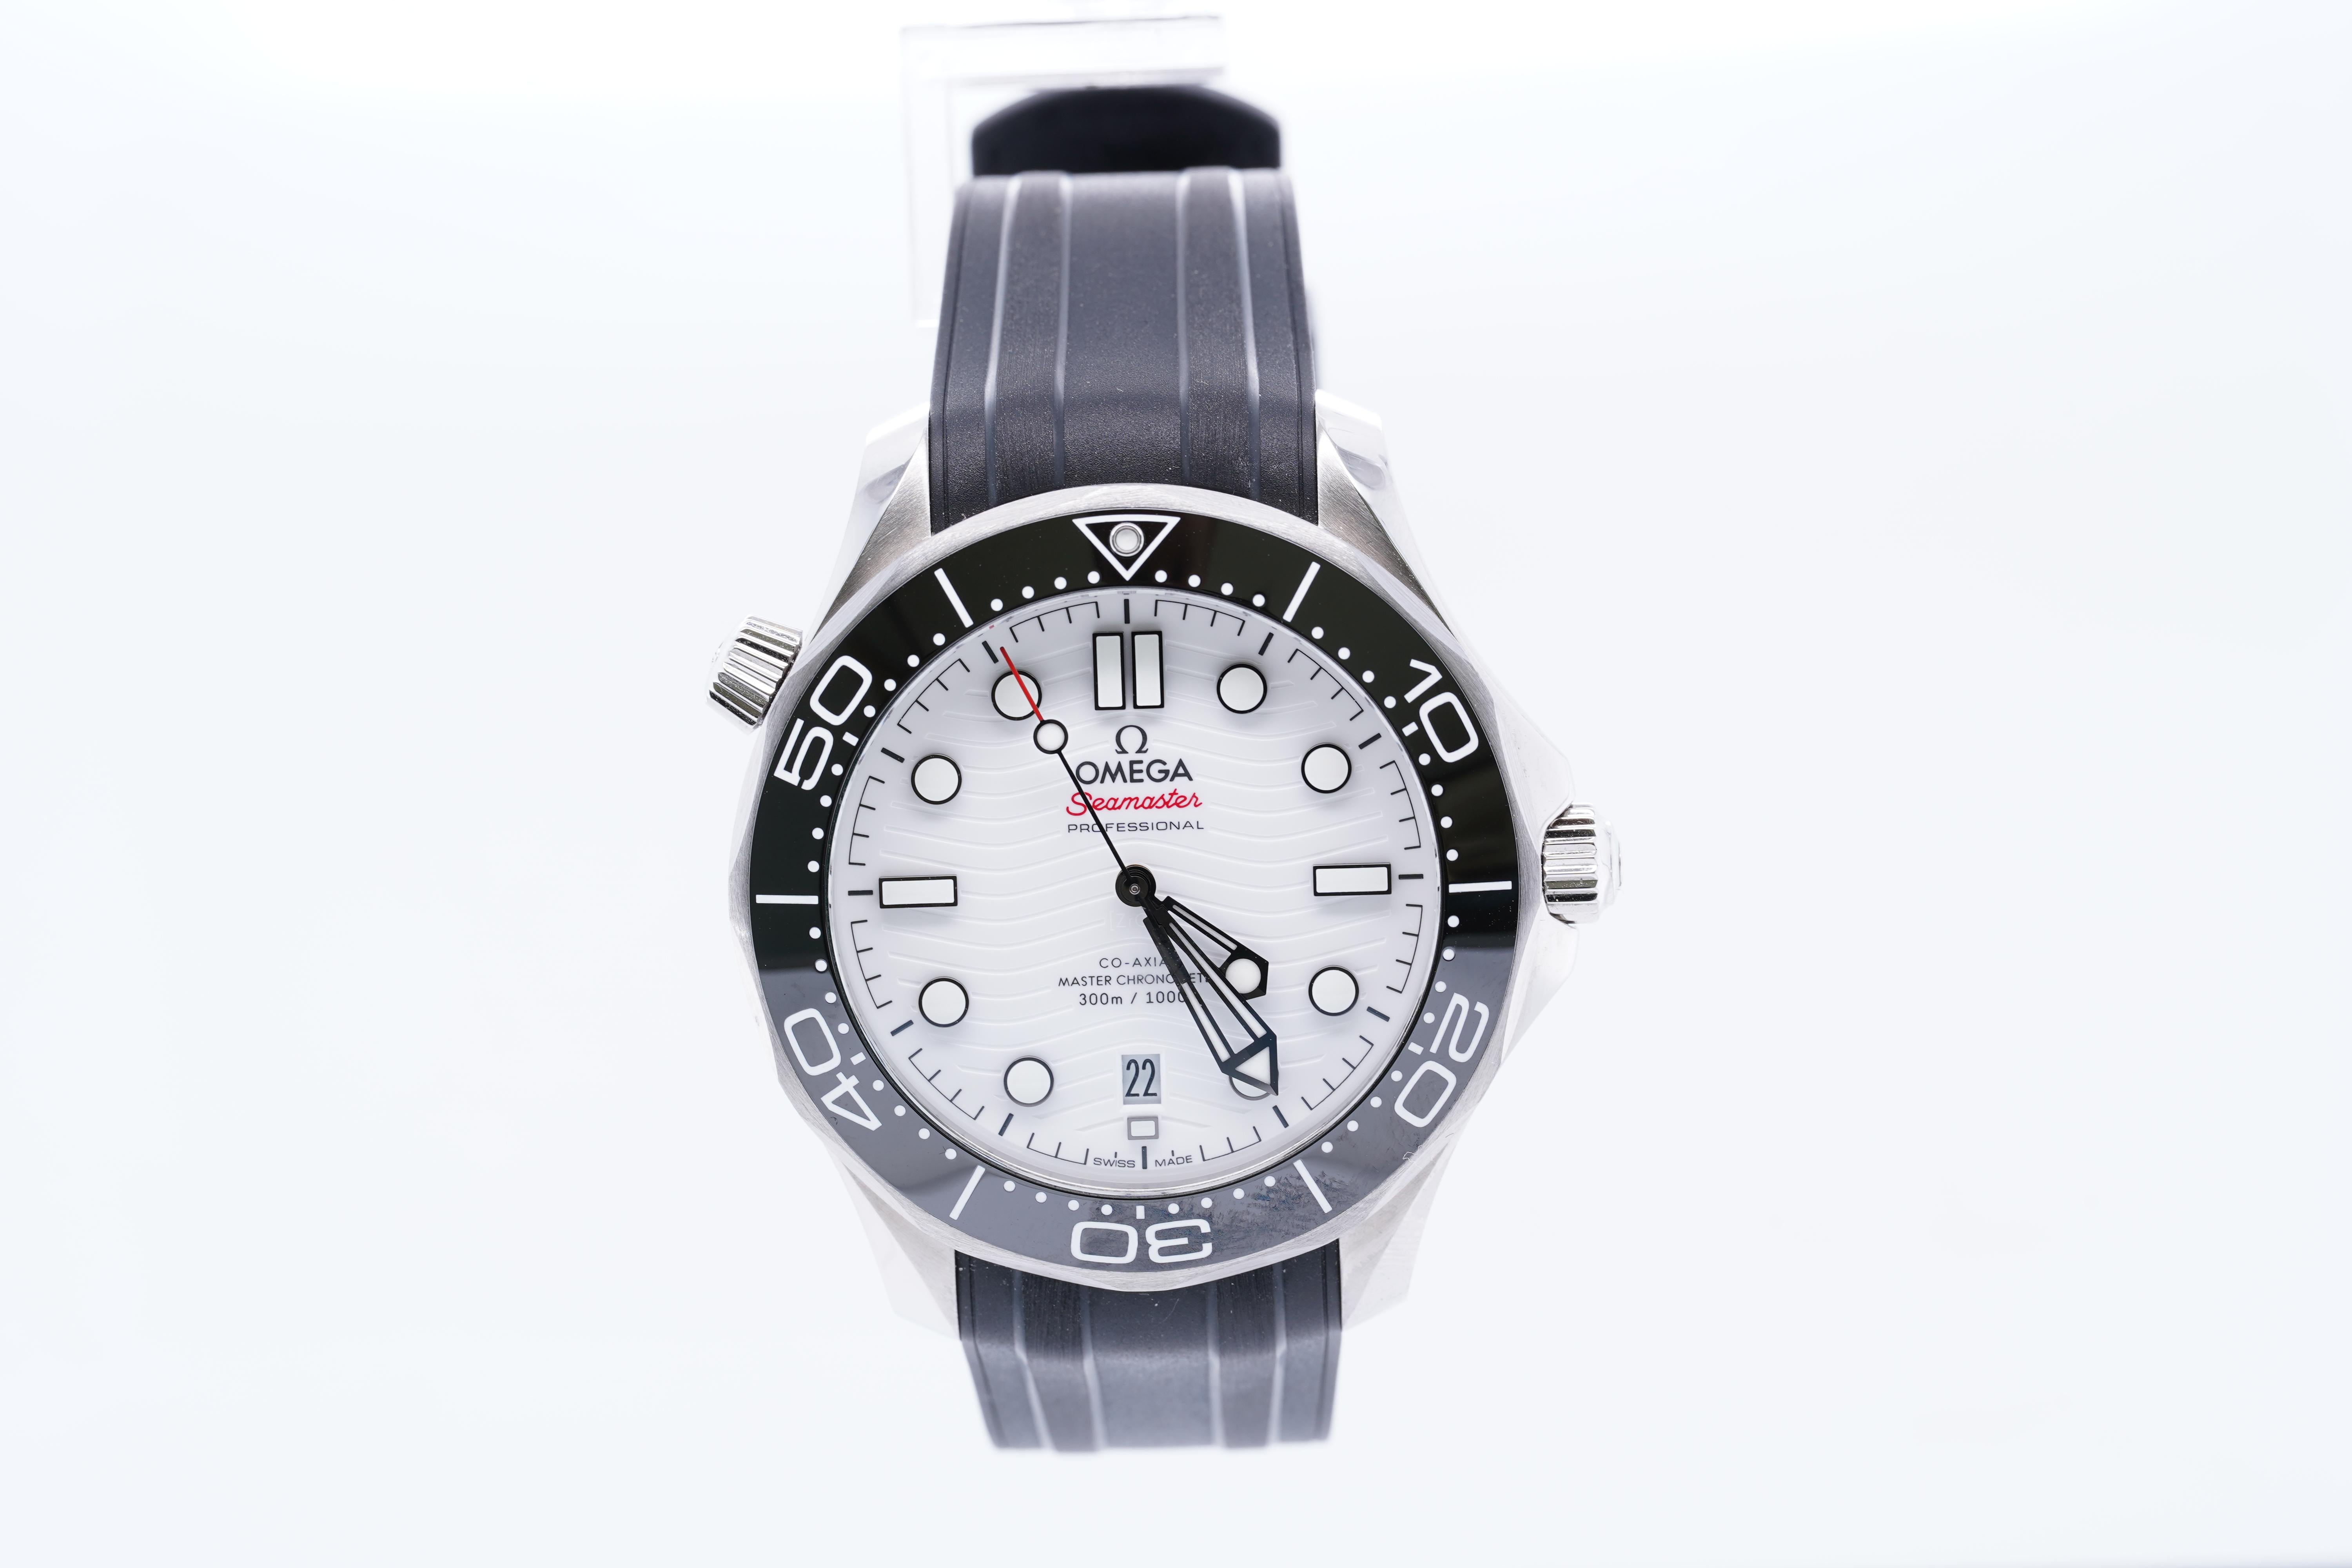 Omega Seamaster Diver 300M Co-Axial Master Chronometer White Dial Black Rubber Strap Watch, 42mm, Ref: O21032422004001, Watch No: 82838192

Omega SA is a Swiss luxury watchmaker based in Biel/Bienne, Switzerland.[1] Founded by Louis Brandt in La